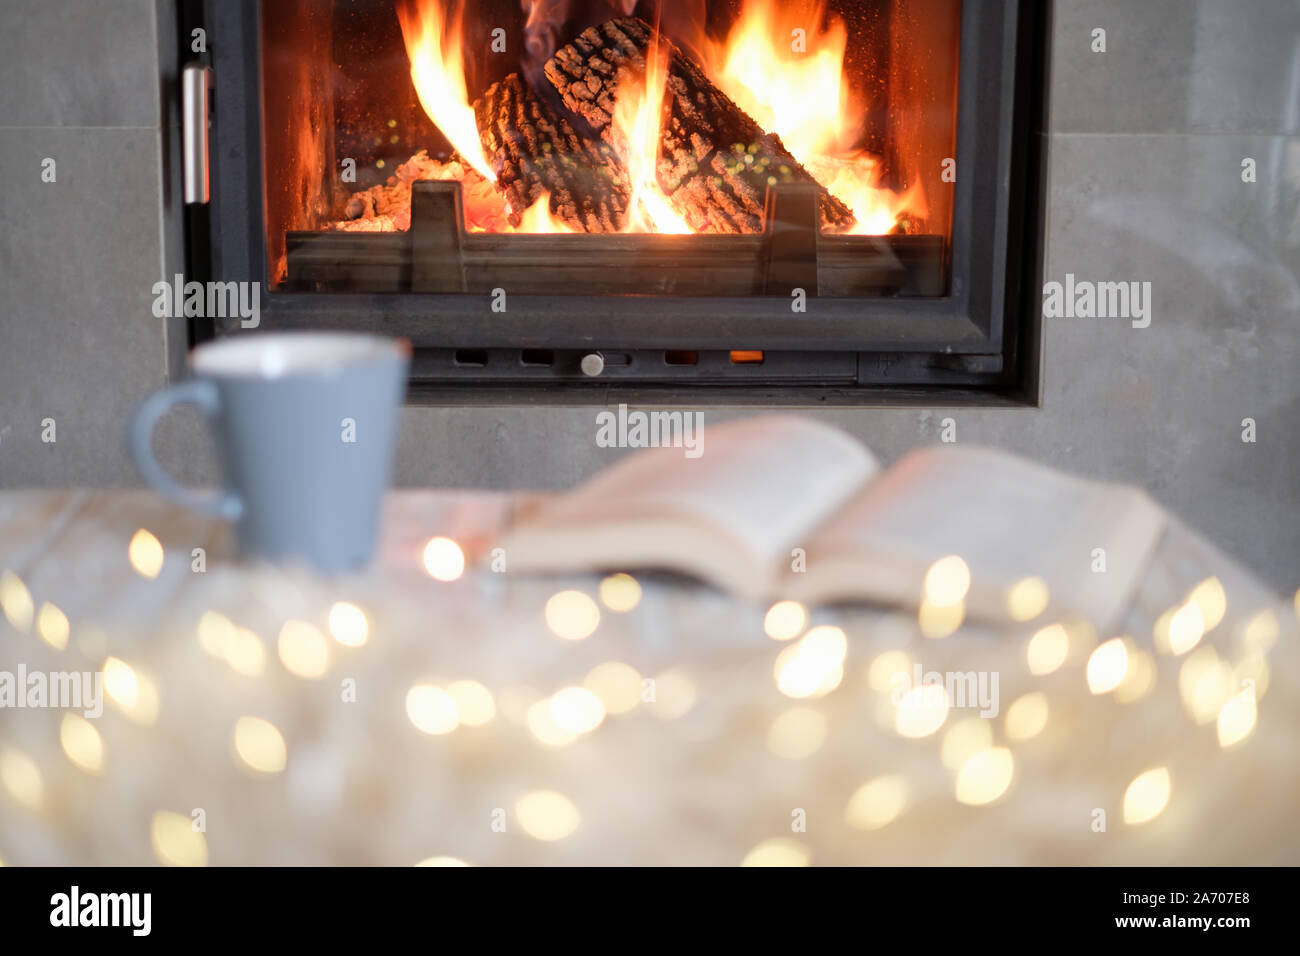 Open book, cup of tea and luminous garland near burning fireplace. Hygge concept Stock Photo